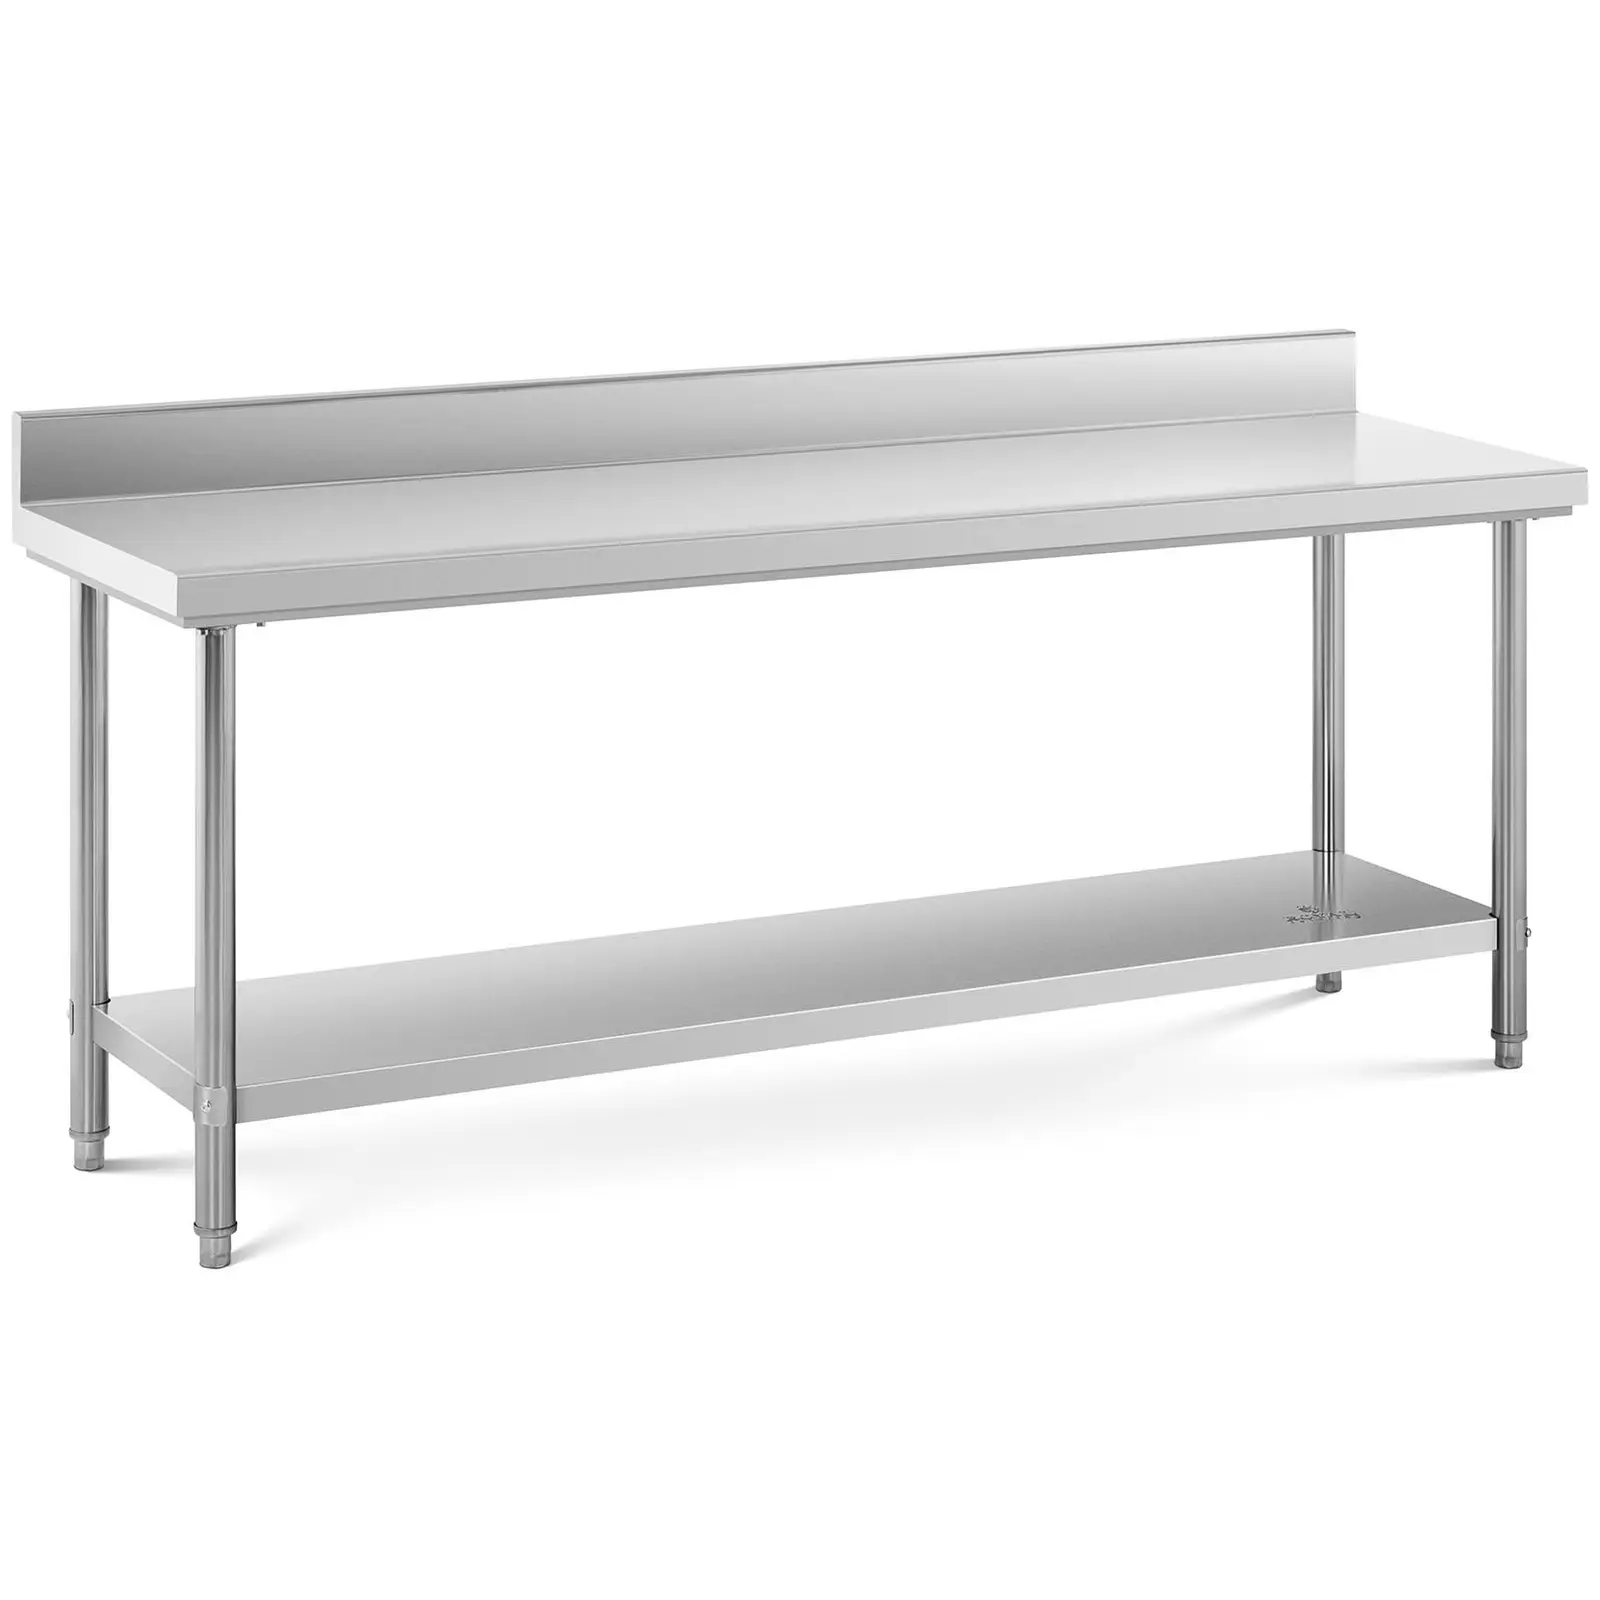 Stainless Steel Work Table - 200 x 60 cm - upstand - 240 kg load capacity - Royal Catering